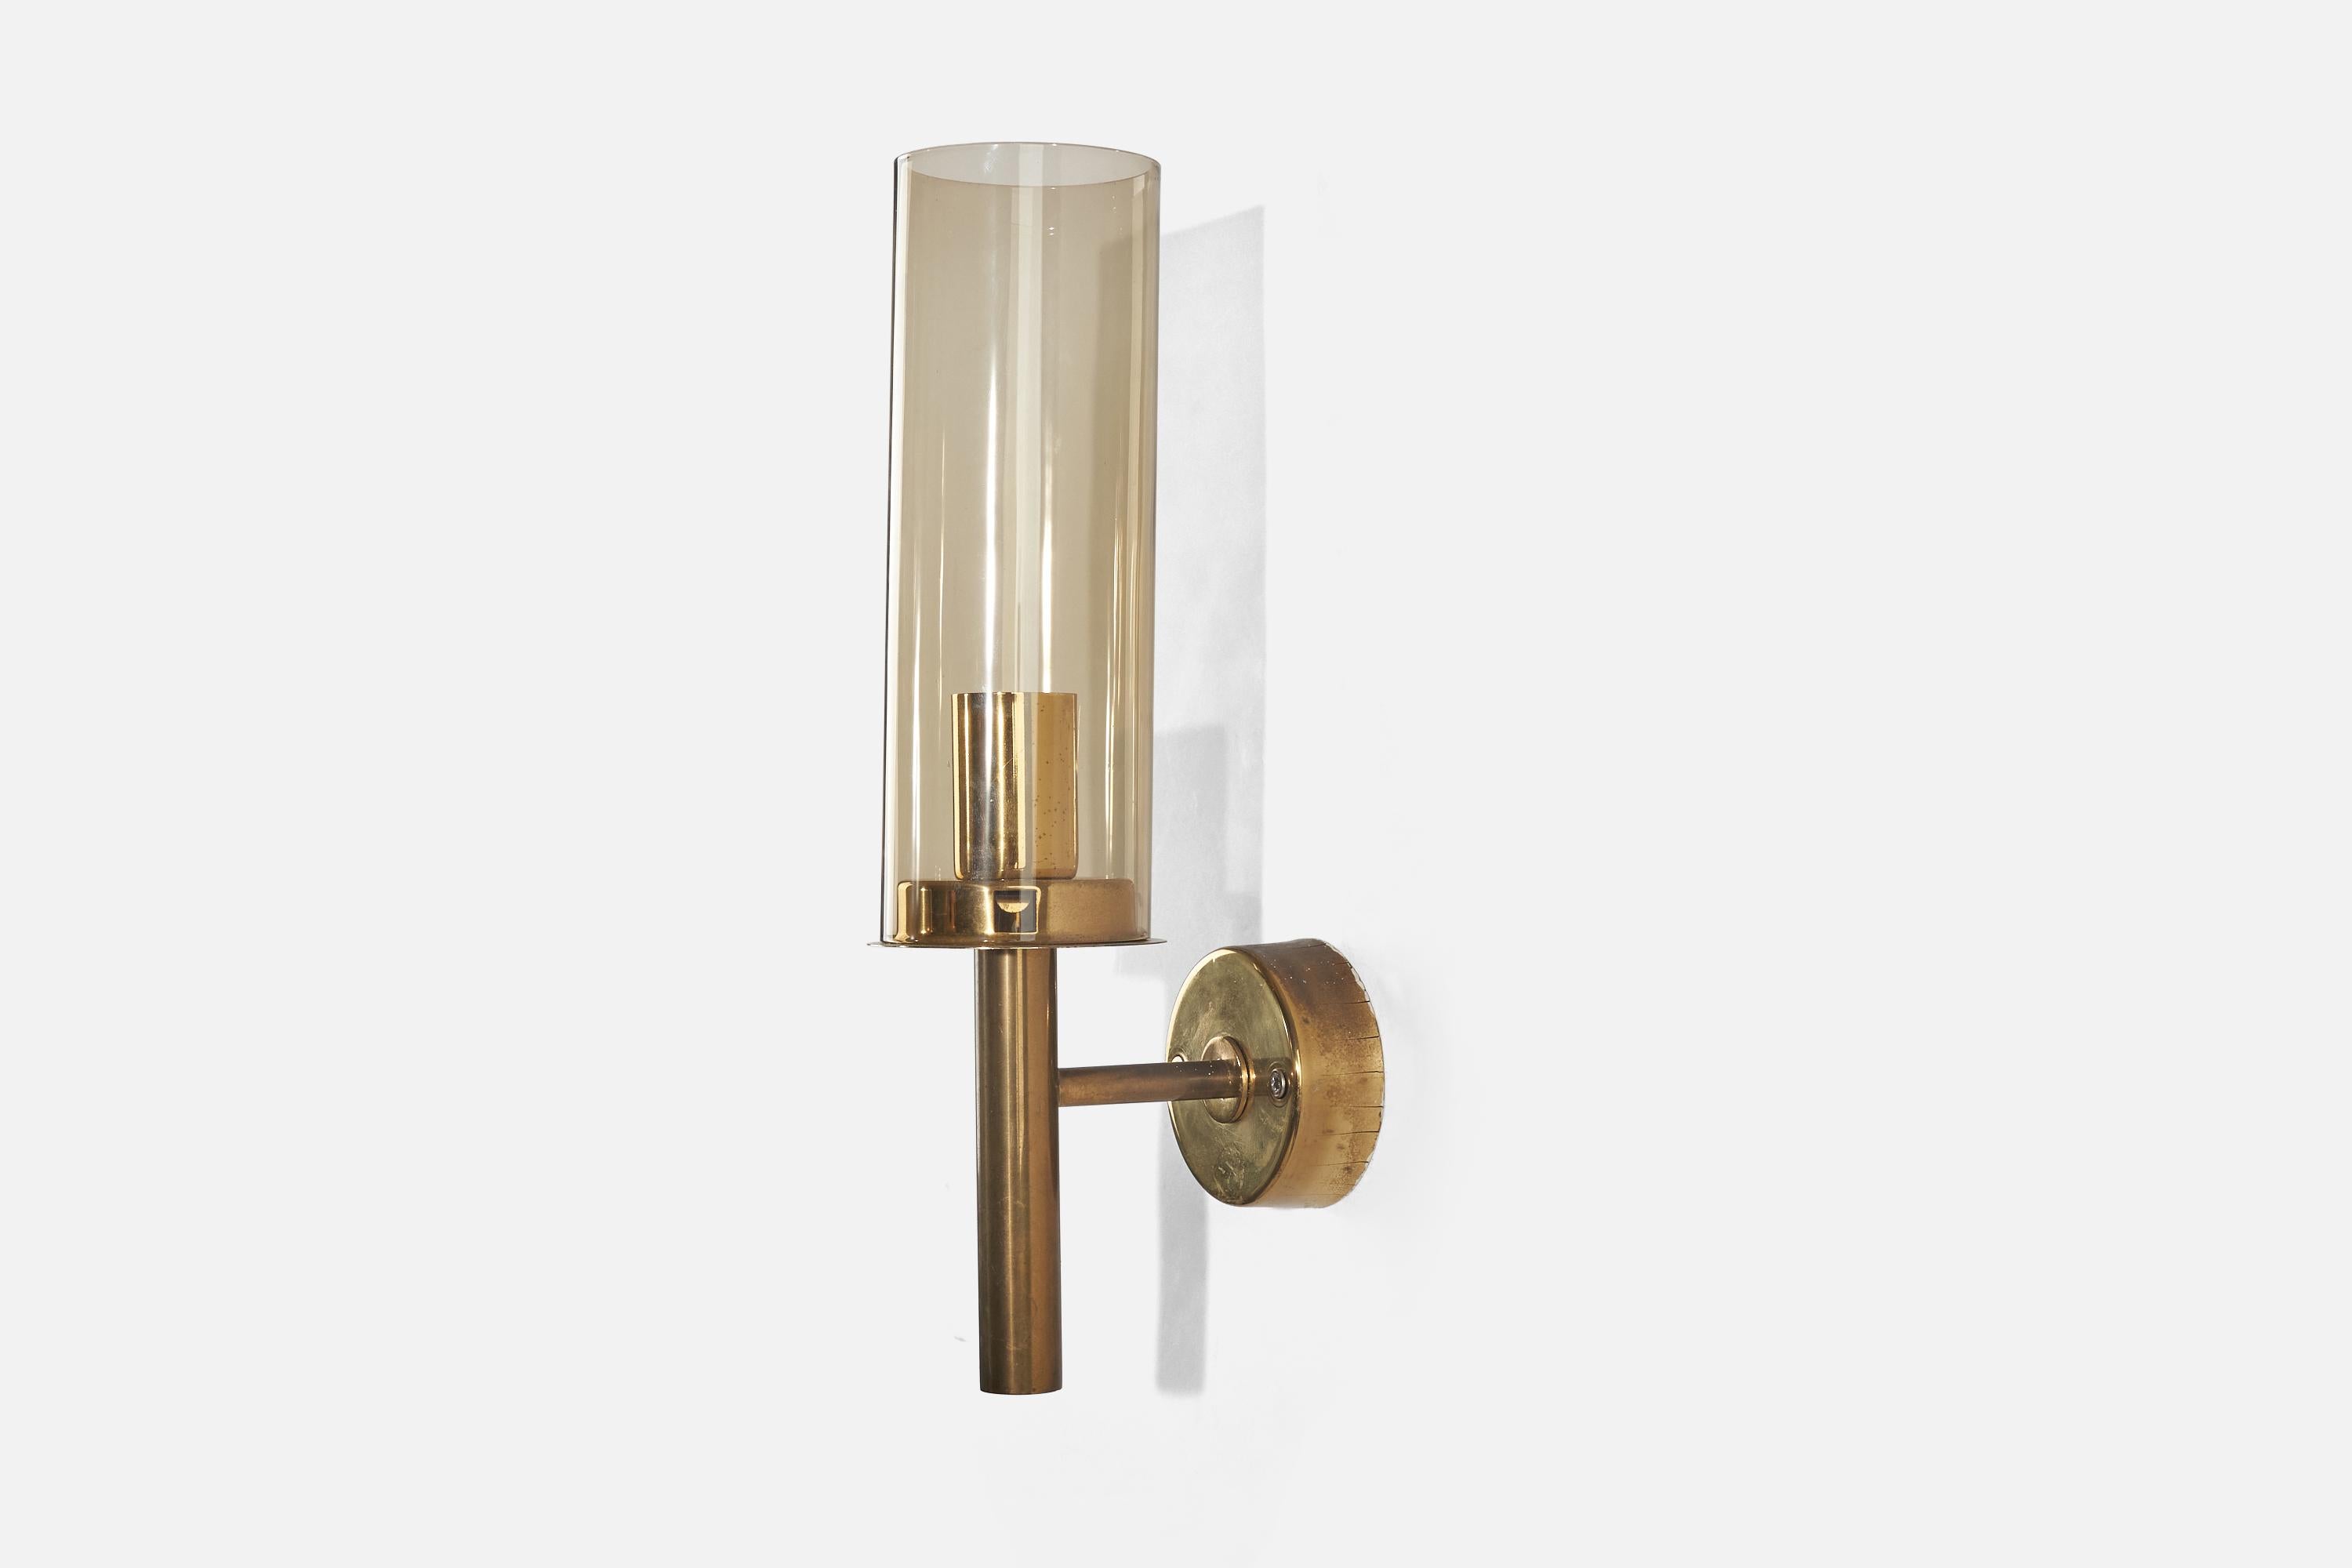 Mid-20th Century Hans-Agne Jakobsson, Pair of Wall Lights, Brass, Glass, Sweden, c. 1960s For Sale